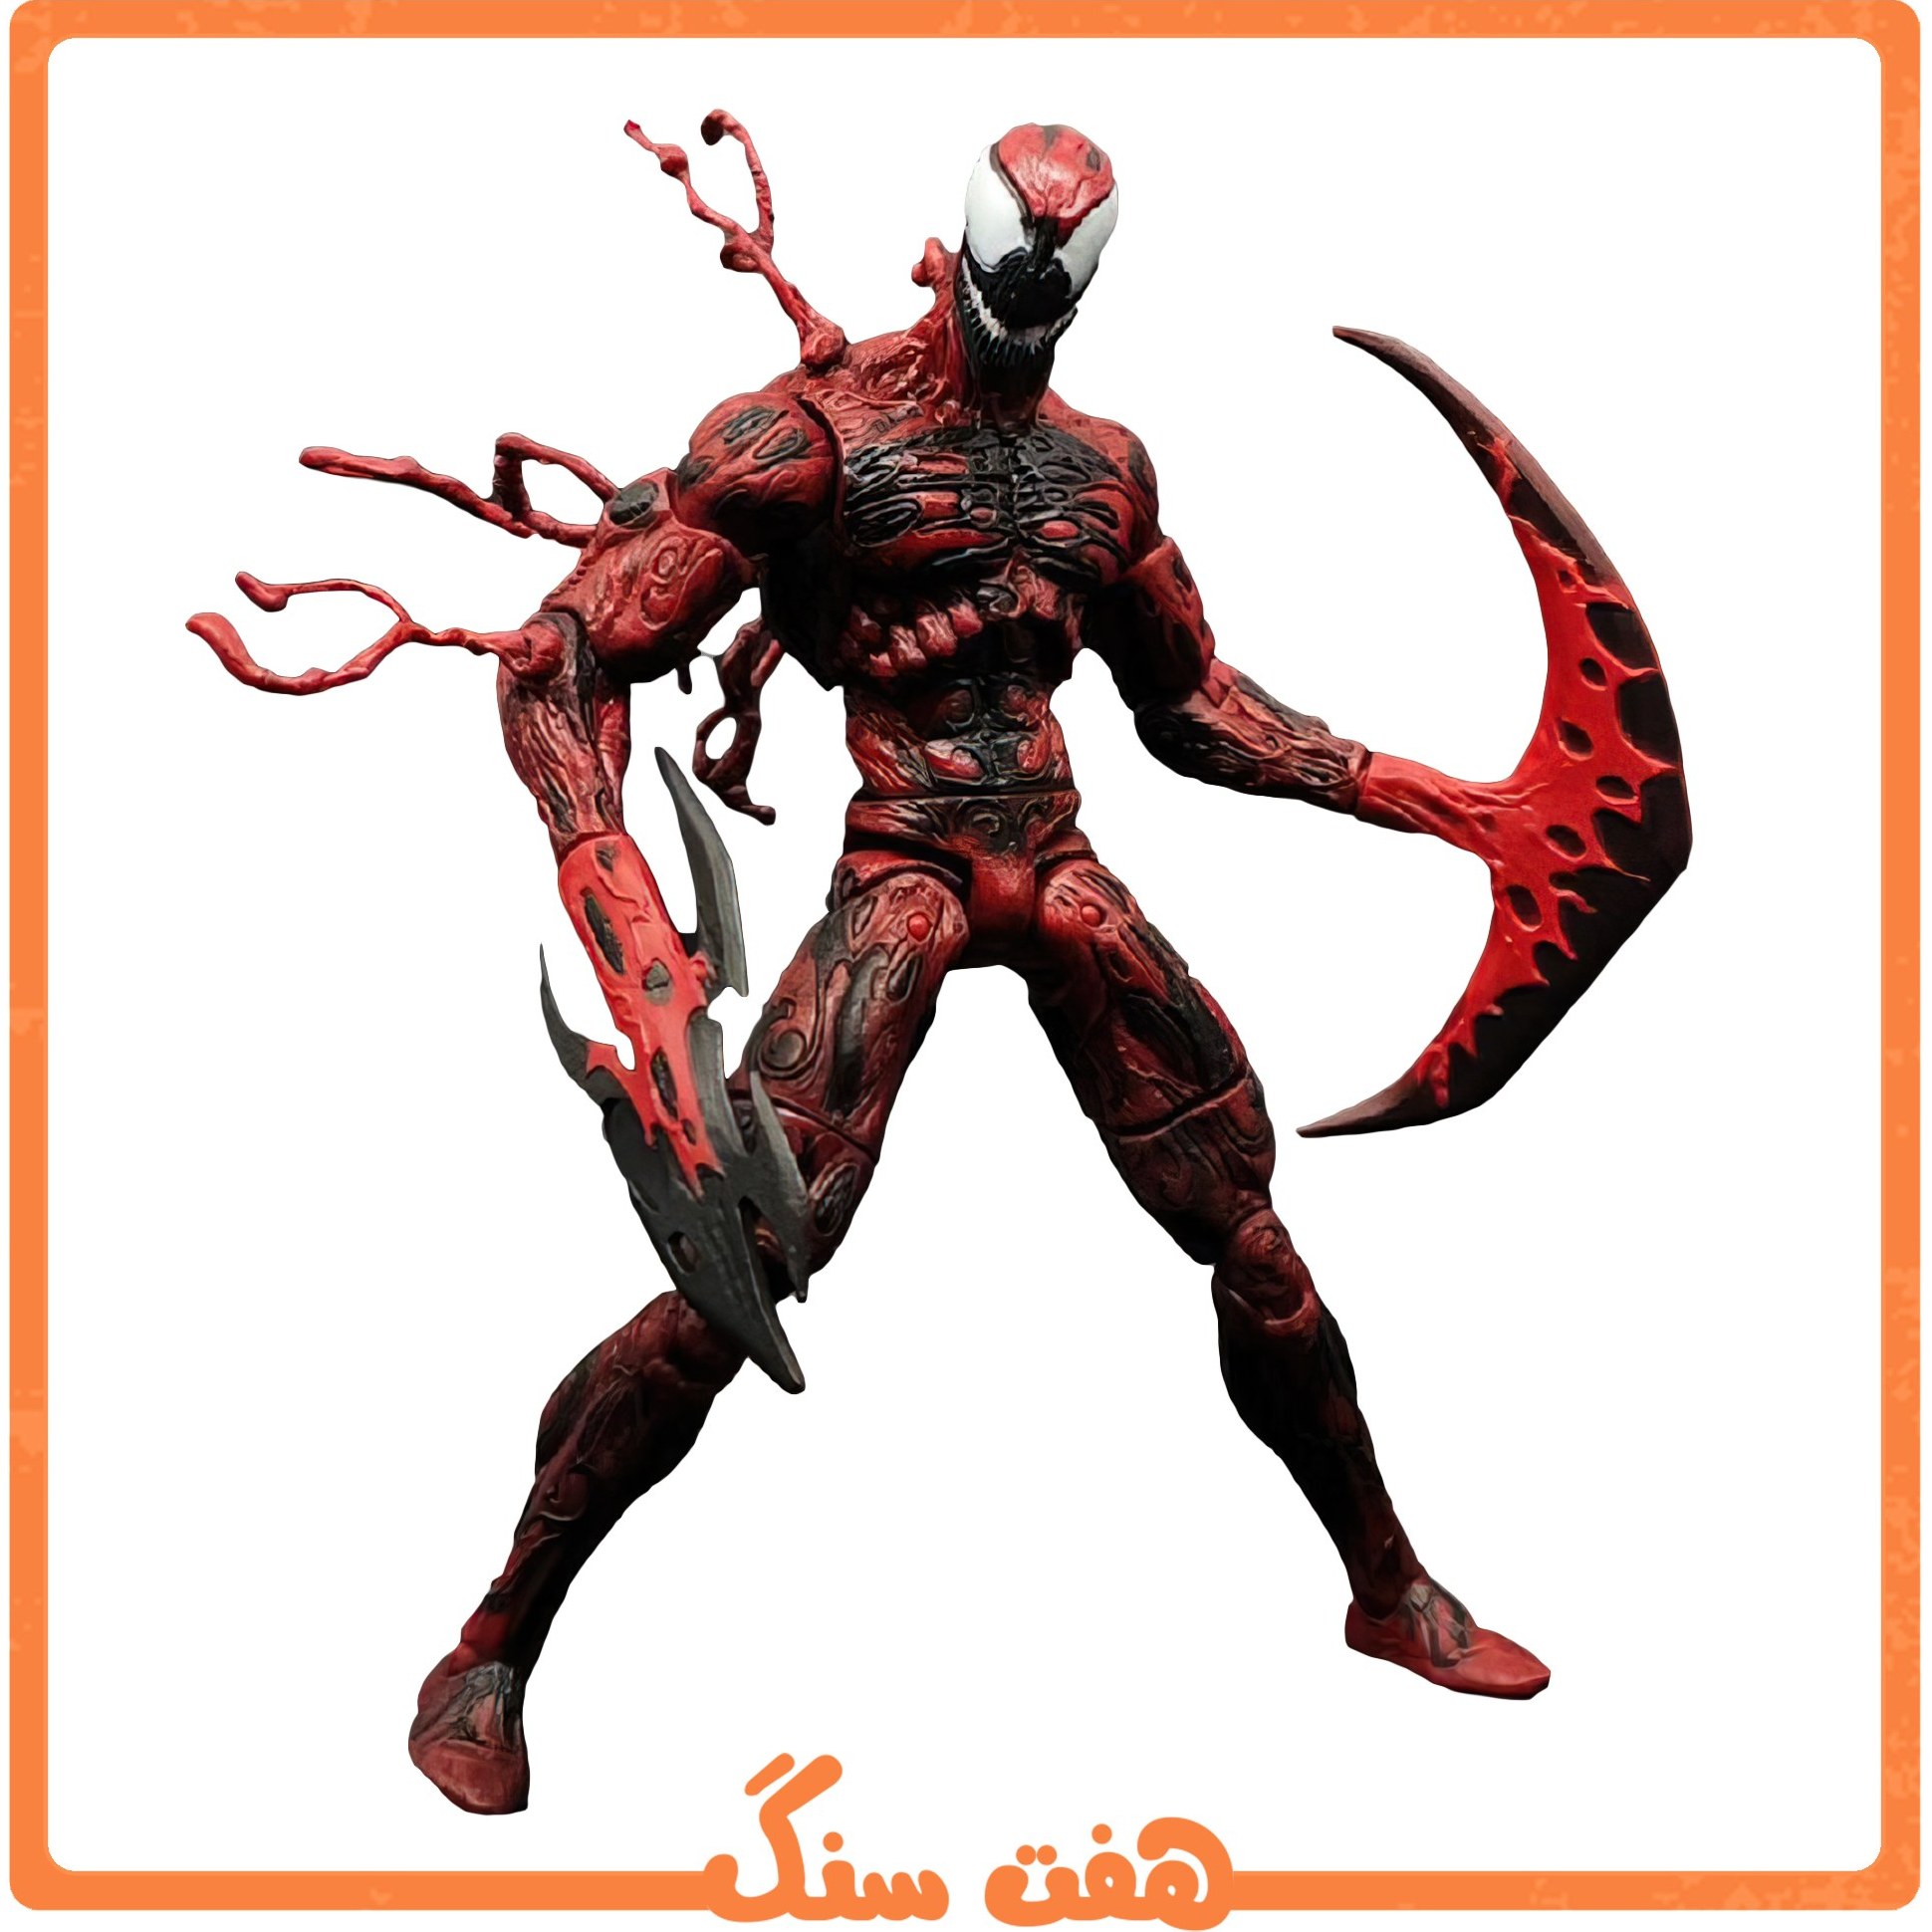 tequilafy Carnage Action Figure, Red Venom Toy, Yamaguchi Carnage